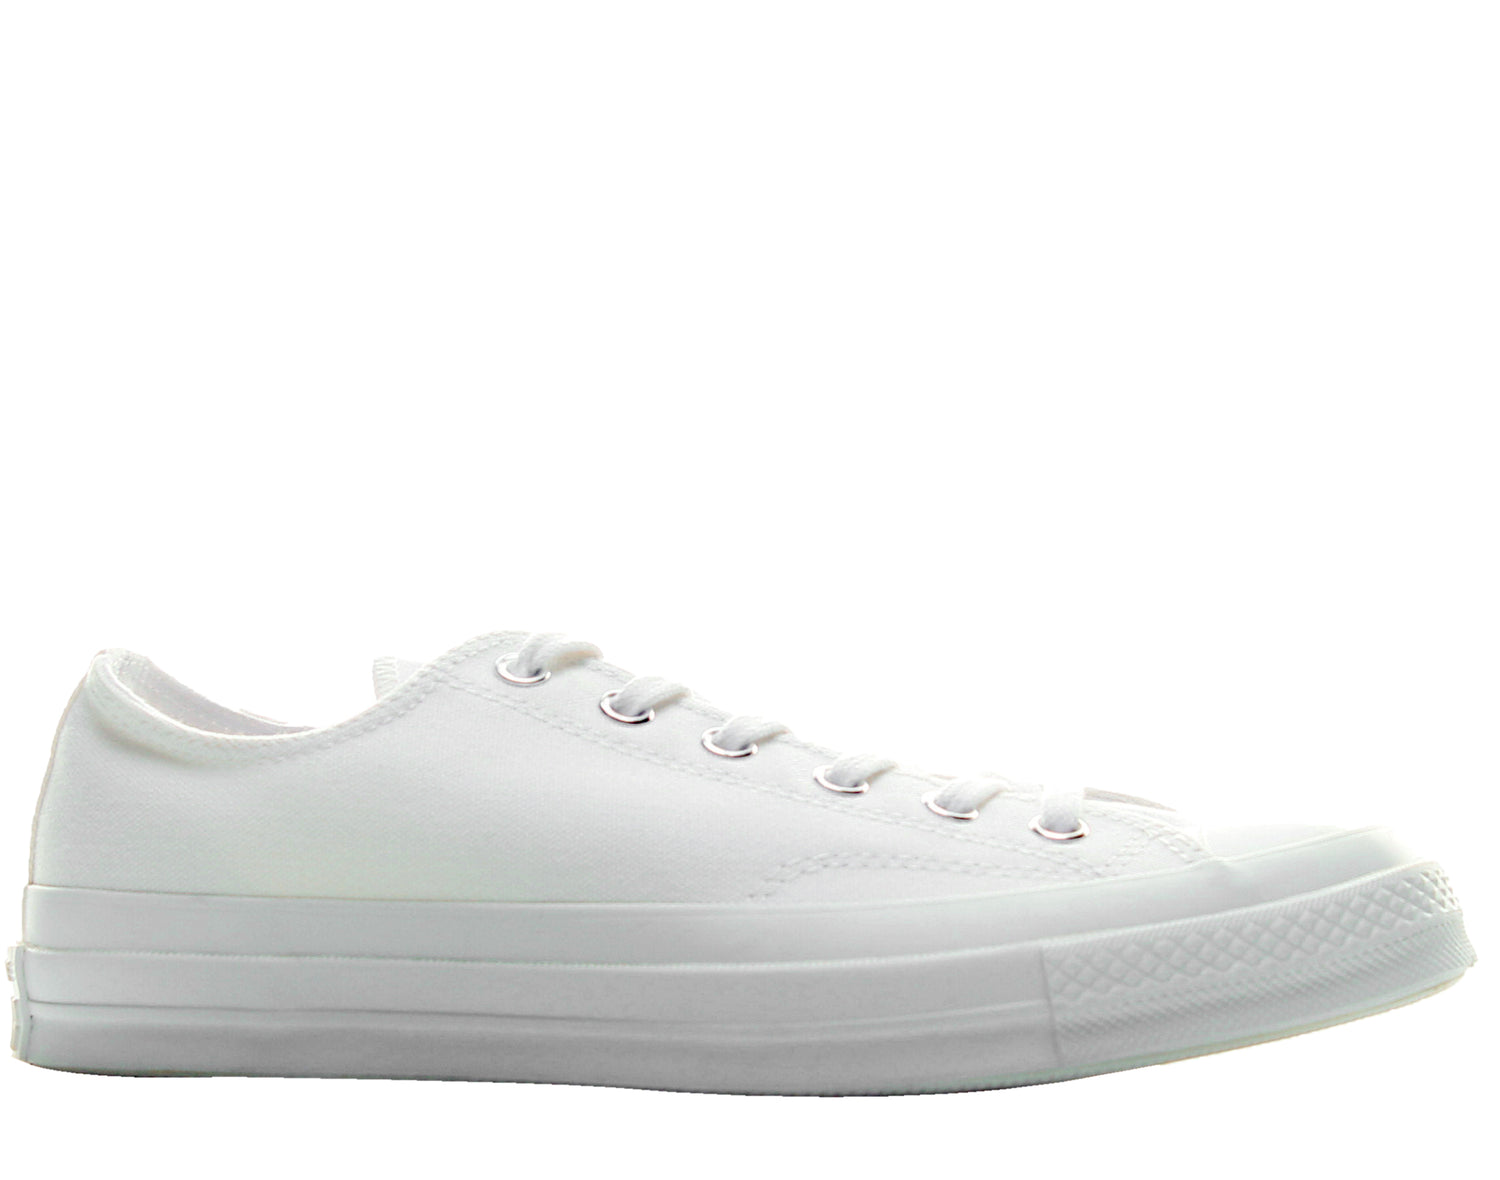 Converse Chuck Taylor All Star OX '70 Low Top Sneakers